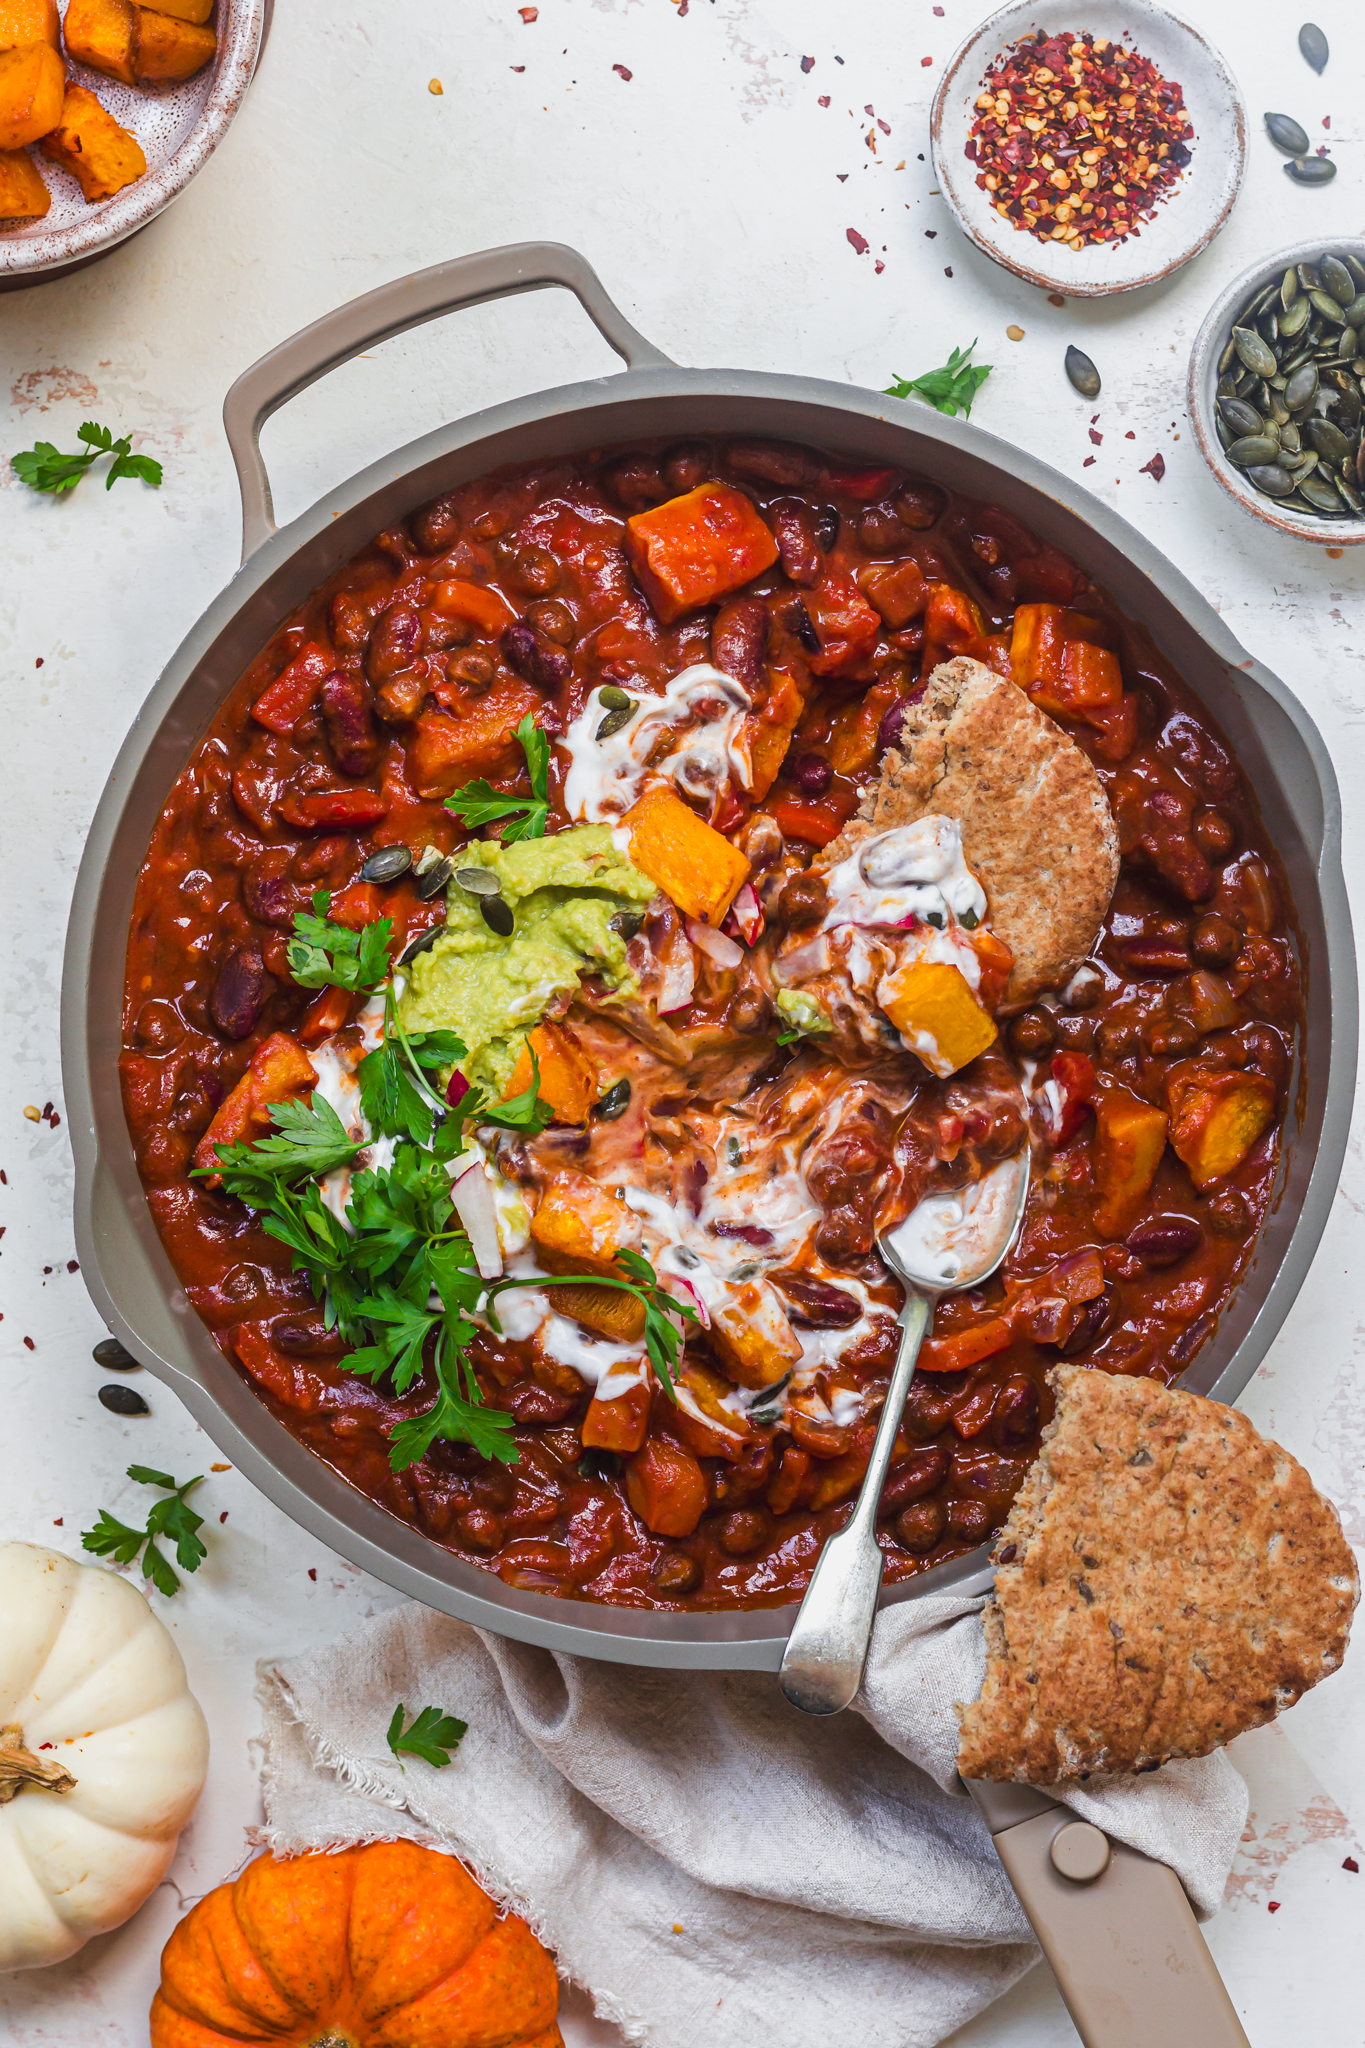 A dish of Roasted Pumpkin and Bean Chilli with flatbreads